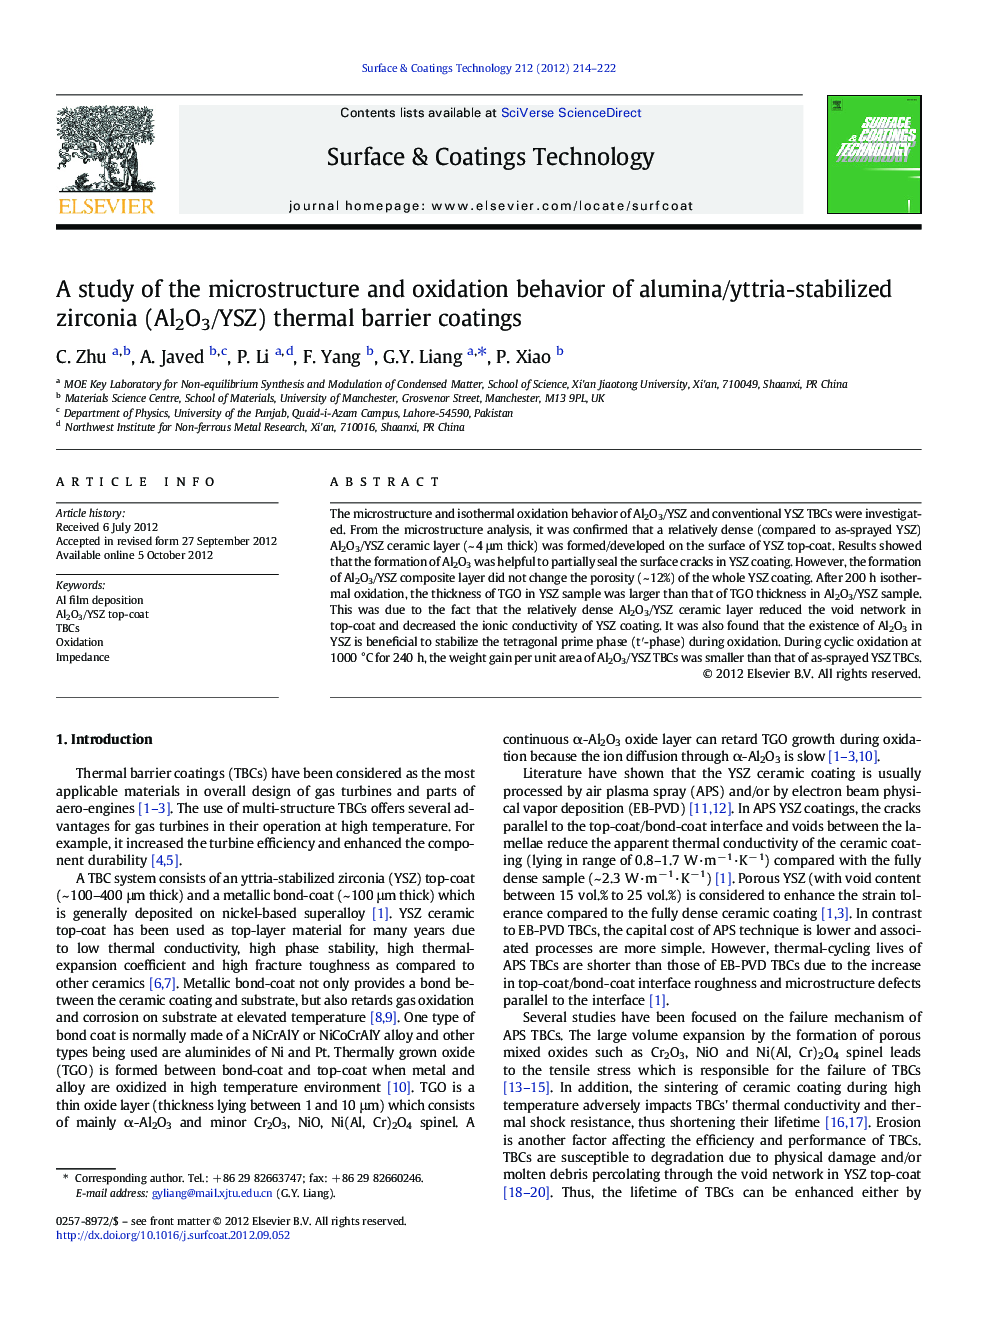 A study of the microstructure and oxidation behavior of alumina/yttria-stabilized zirconia (Al2O3/YSZ) thermal barrier coatings